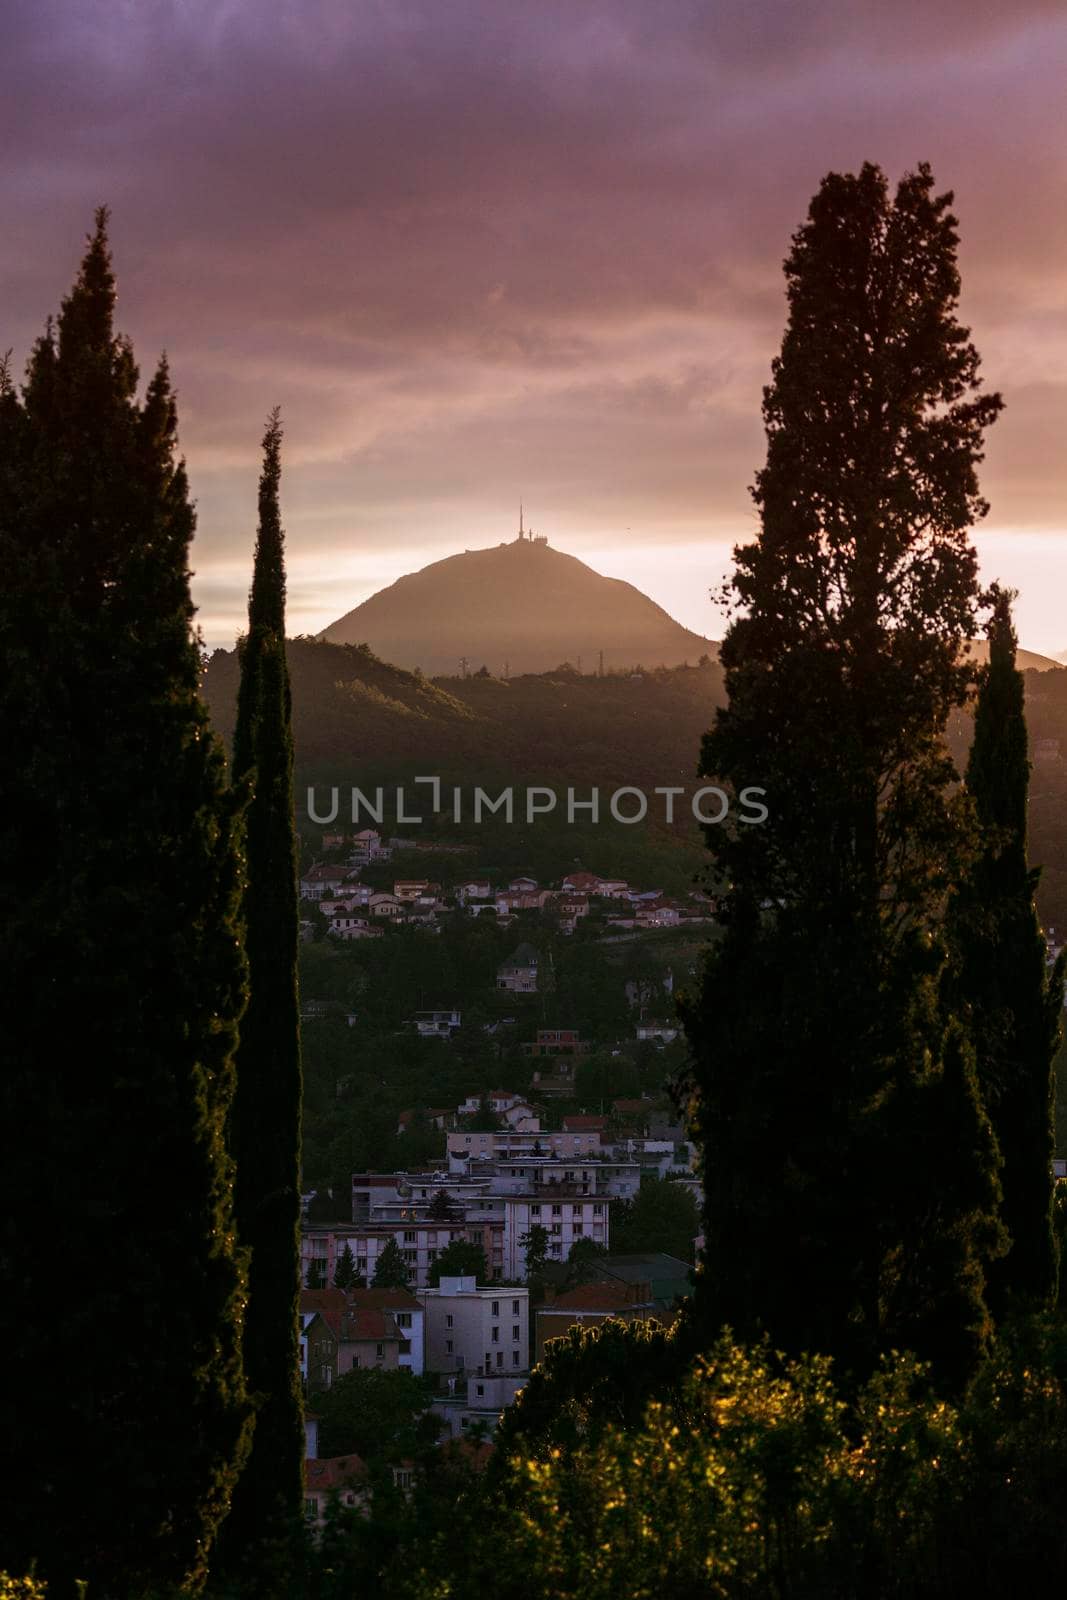 Puy-de-Dome volcano seen from Clermont-Ferrand by benkrut